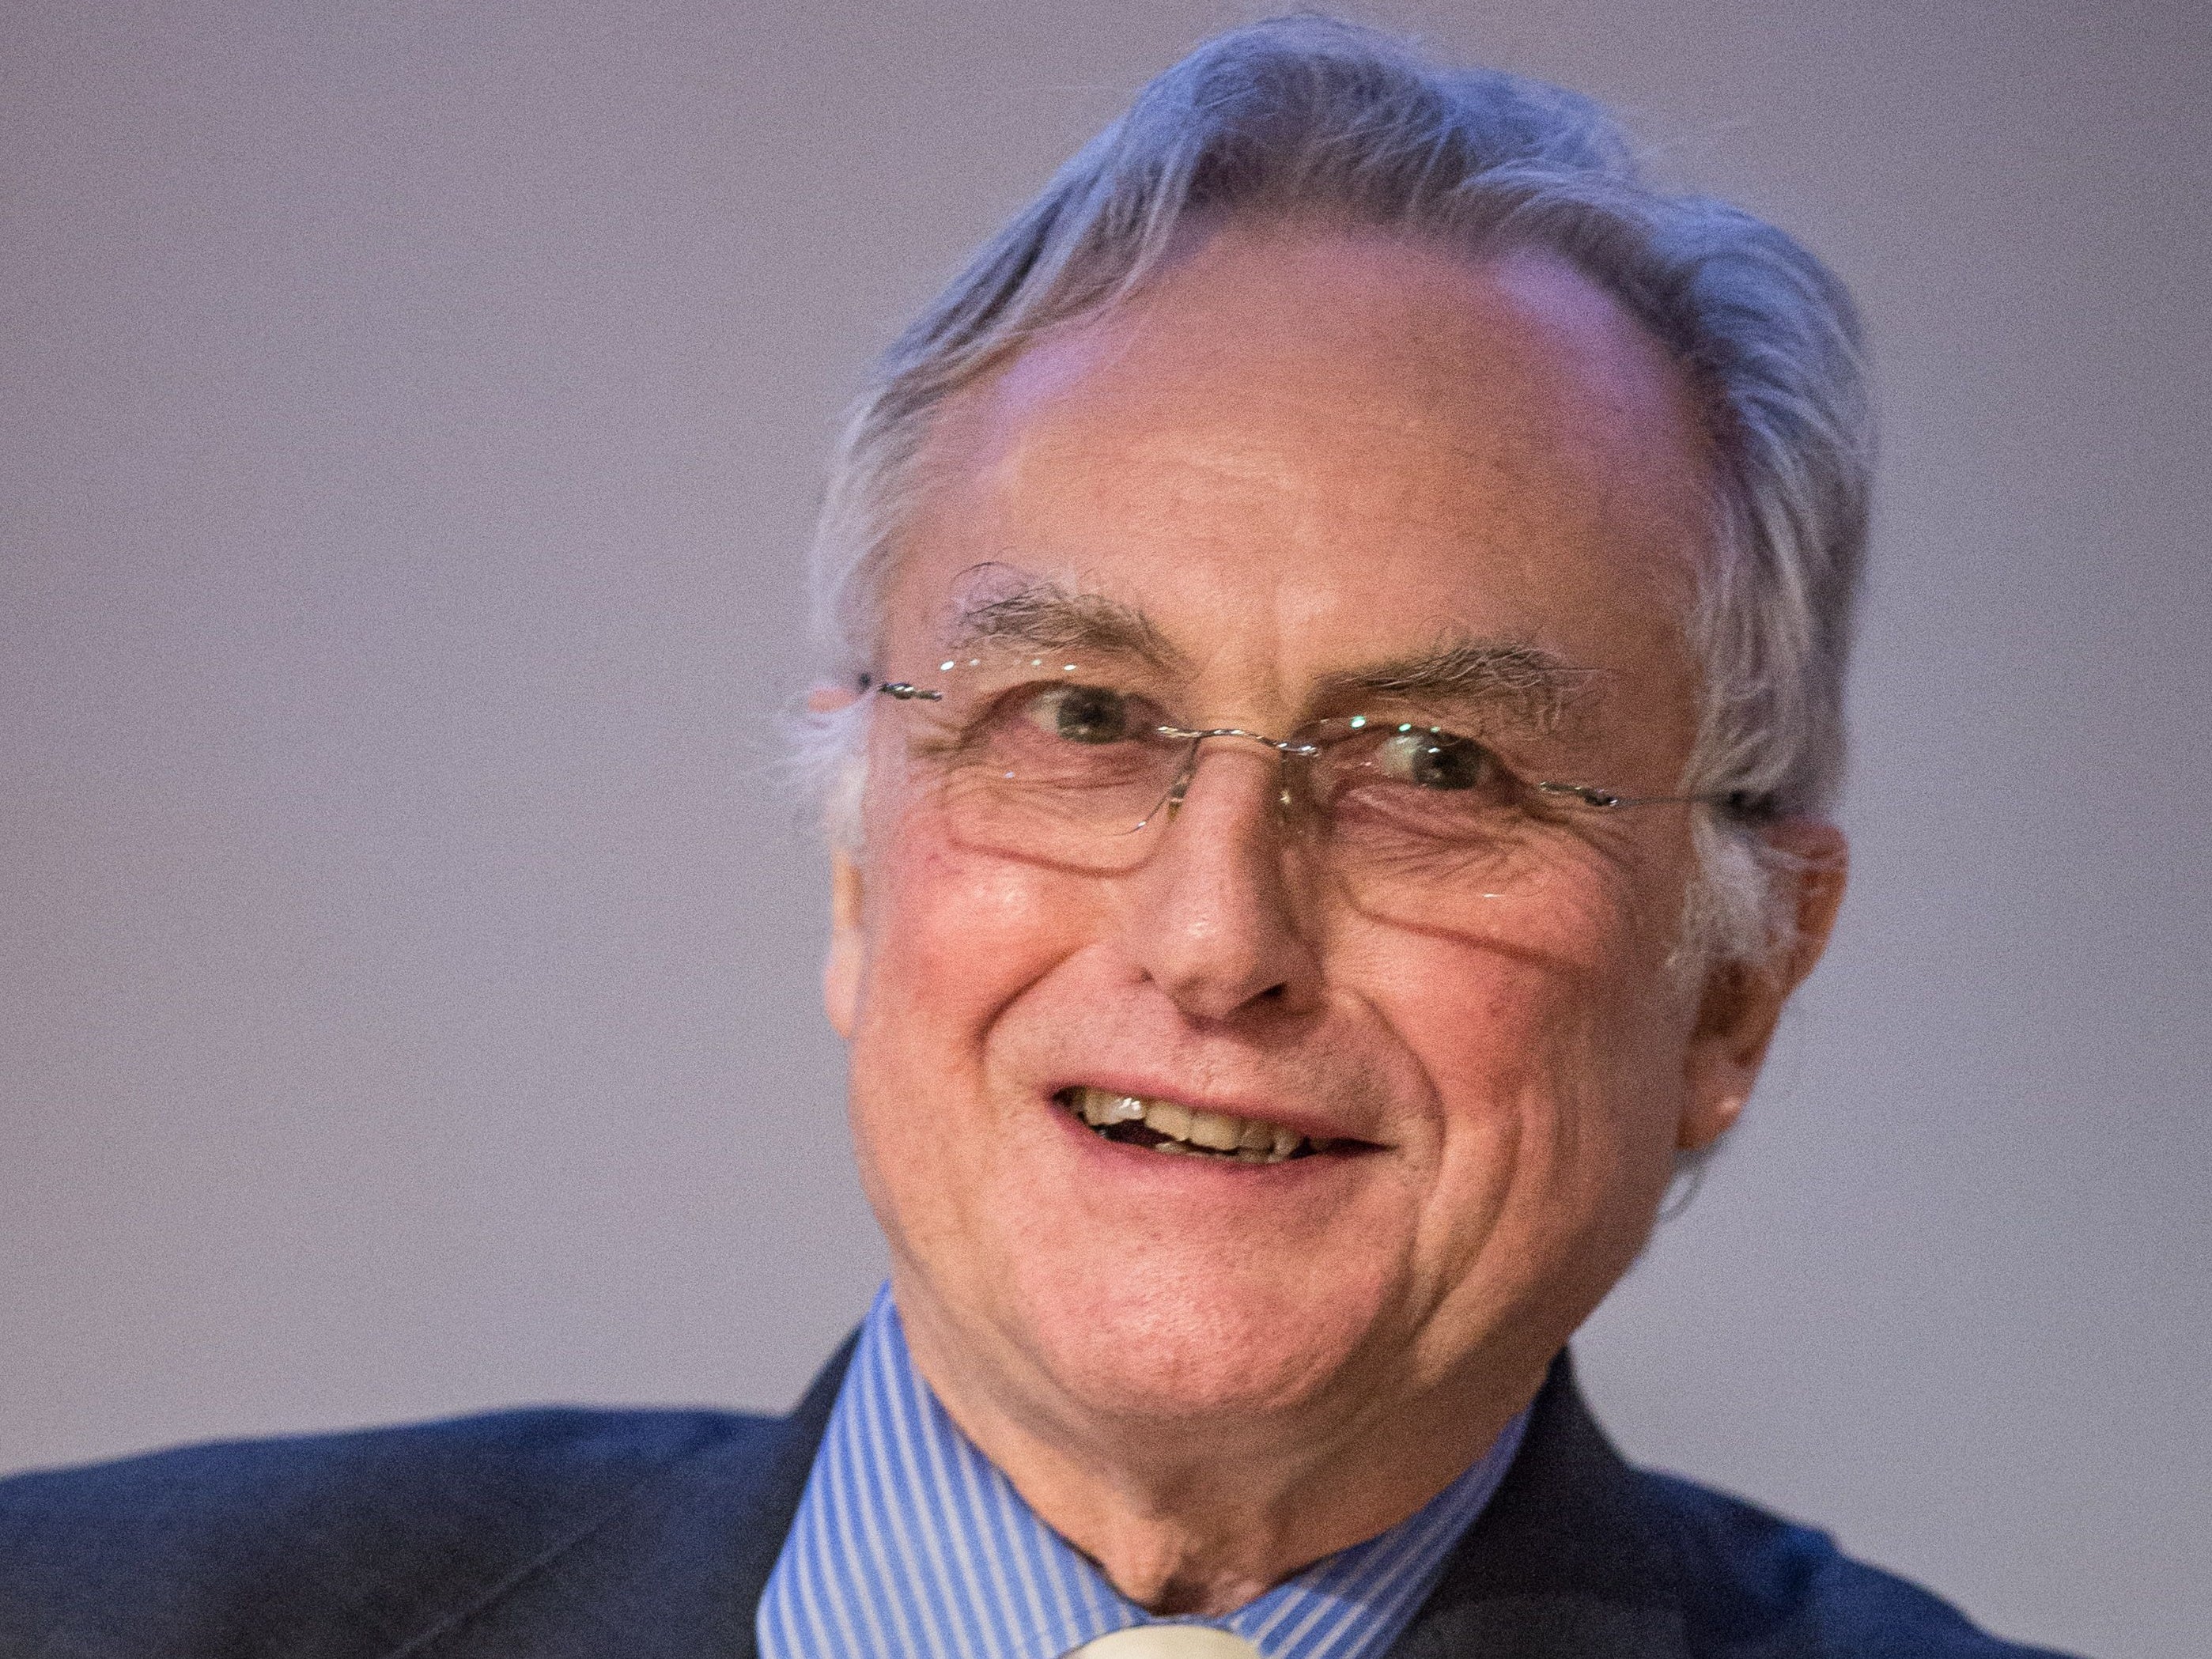 Richard Dawkins pictured at The Royal Society in London on 16 December, 2015.